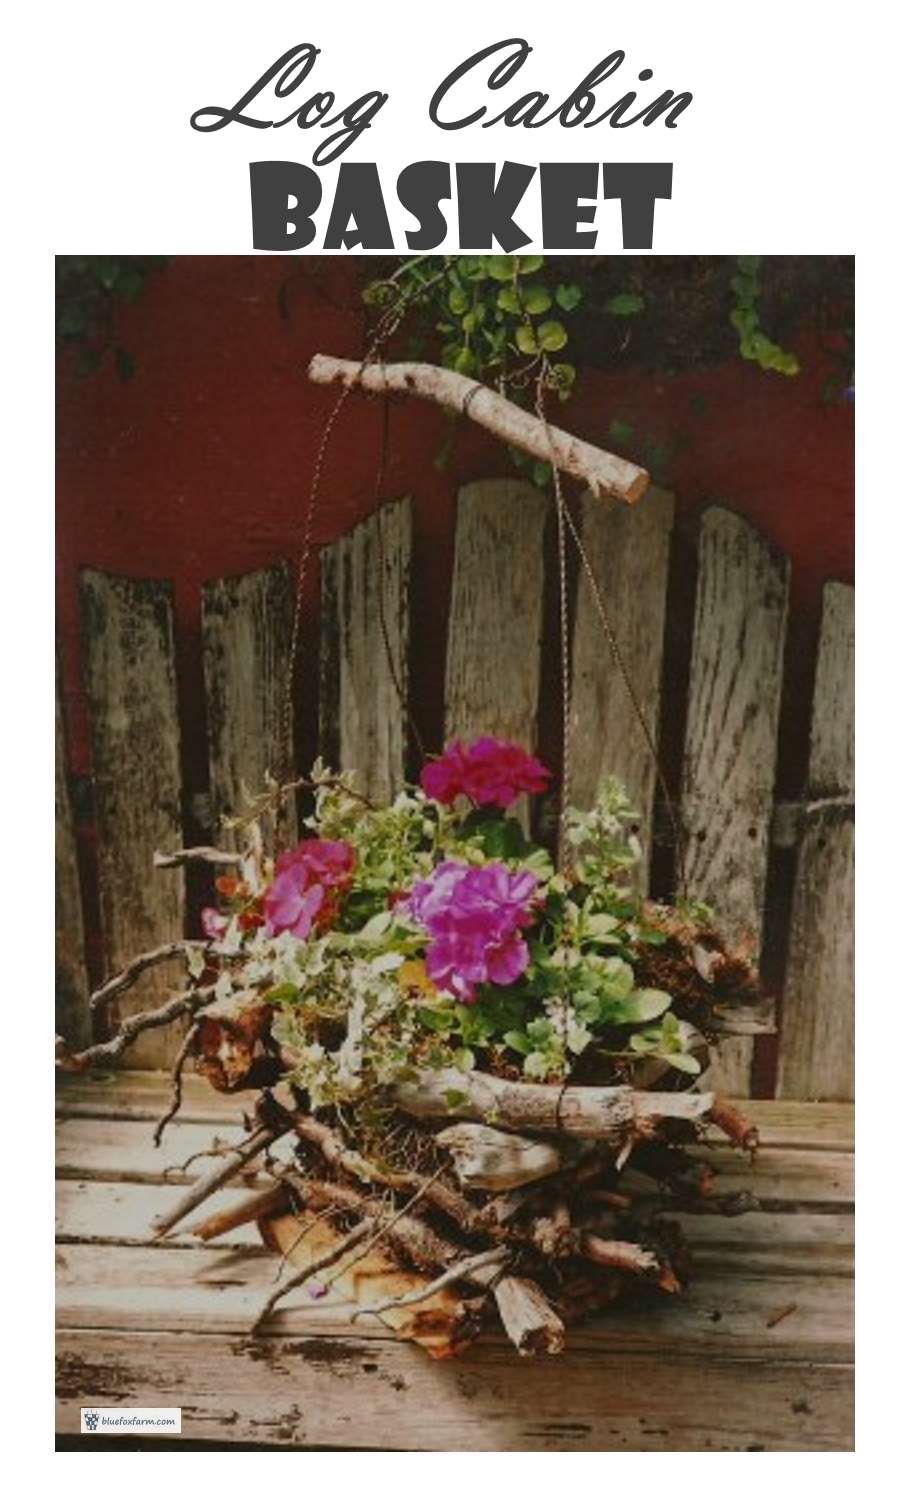 Planted with brightly colored annuals to complement the rustic twigs and roots